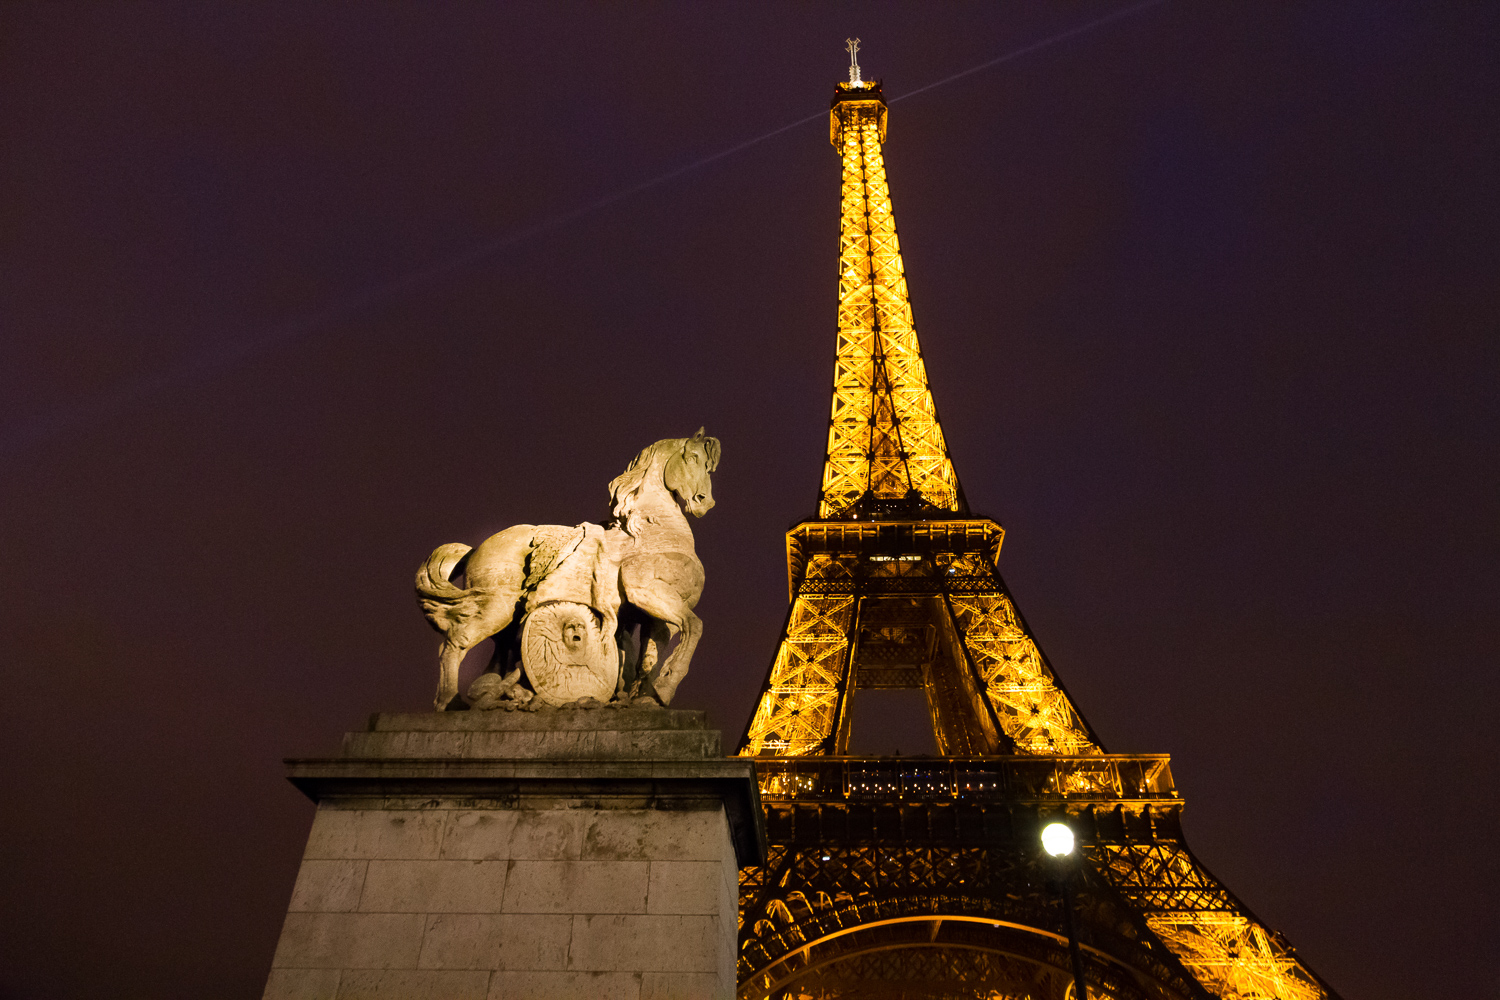 The Eiffel Tower by night.